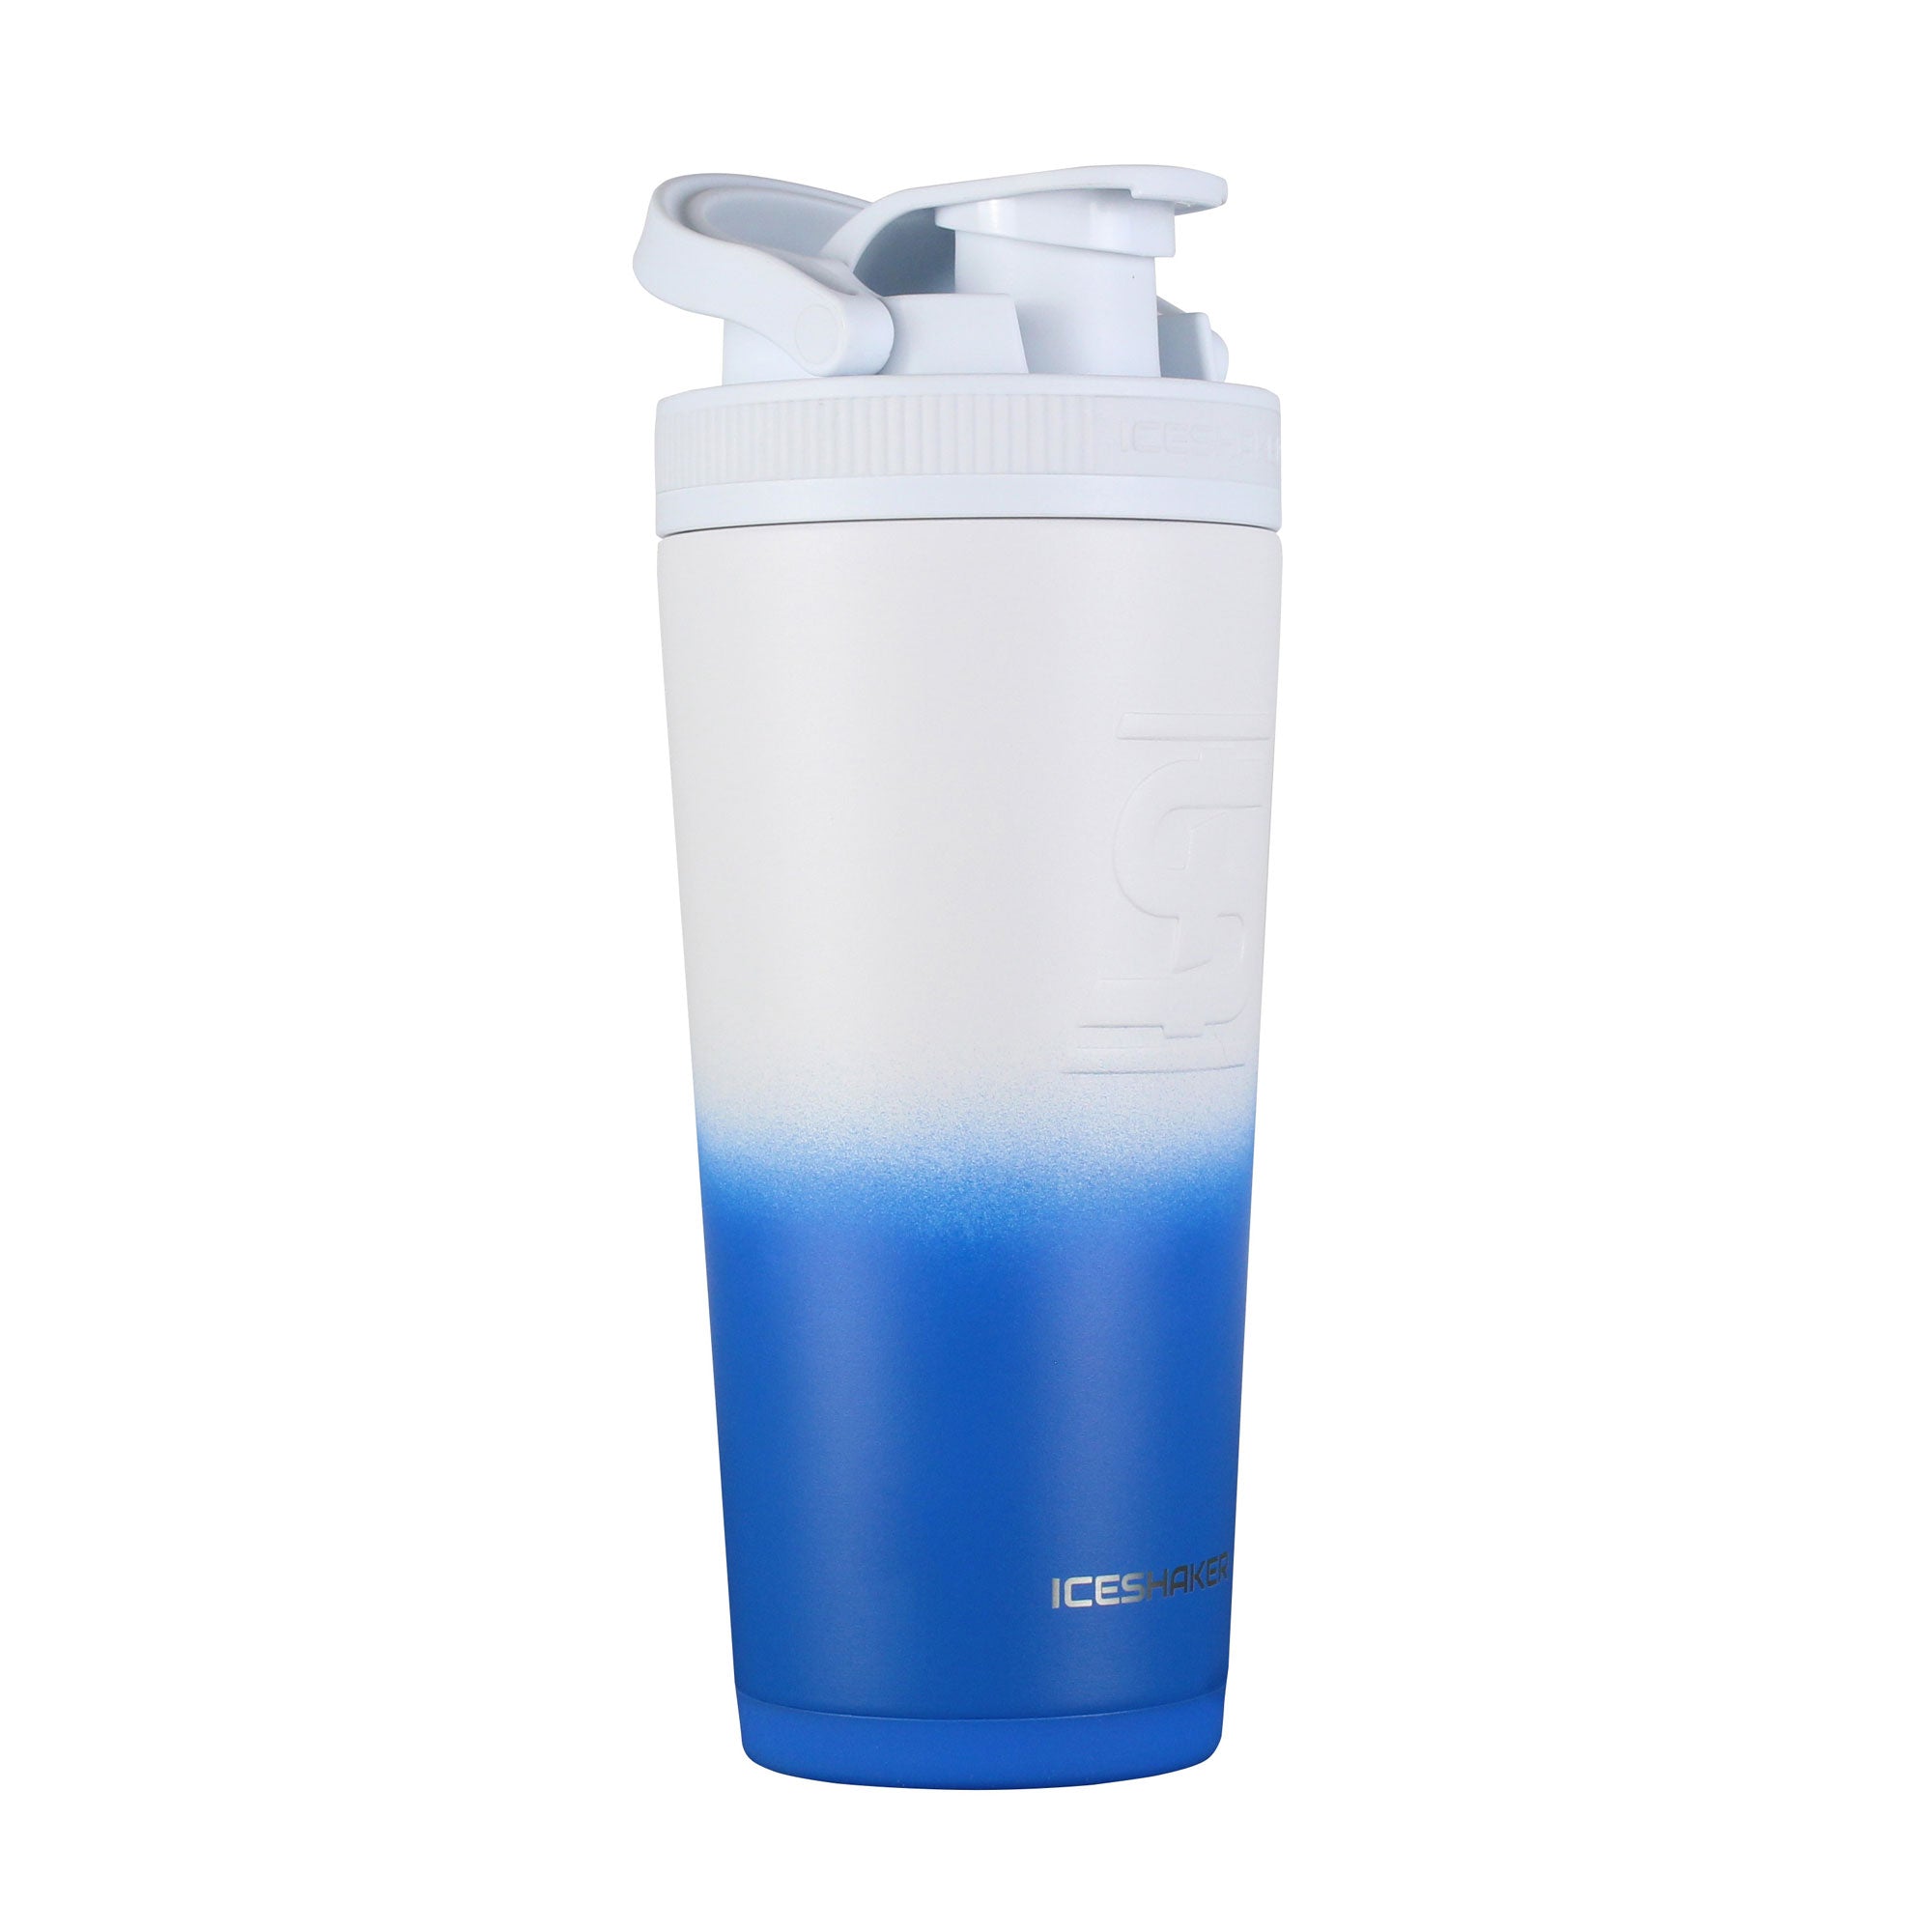 Ice Shaker Double Walled Vacuum Insulated Protein Shaker Bottle, Navy, 26  oz.